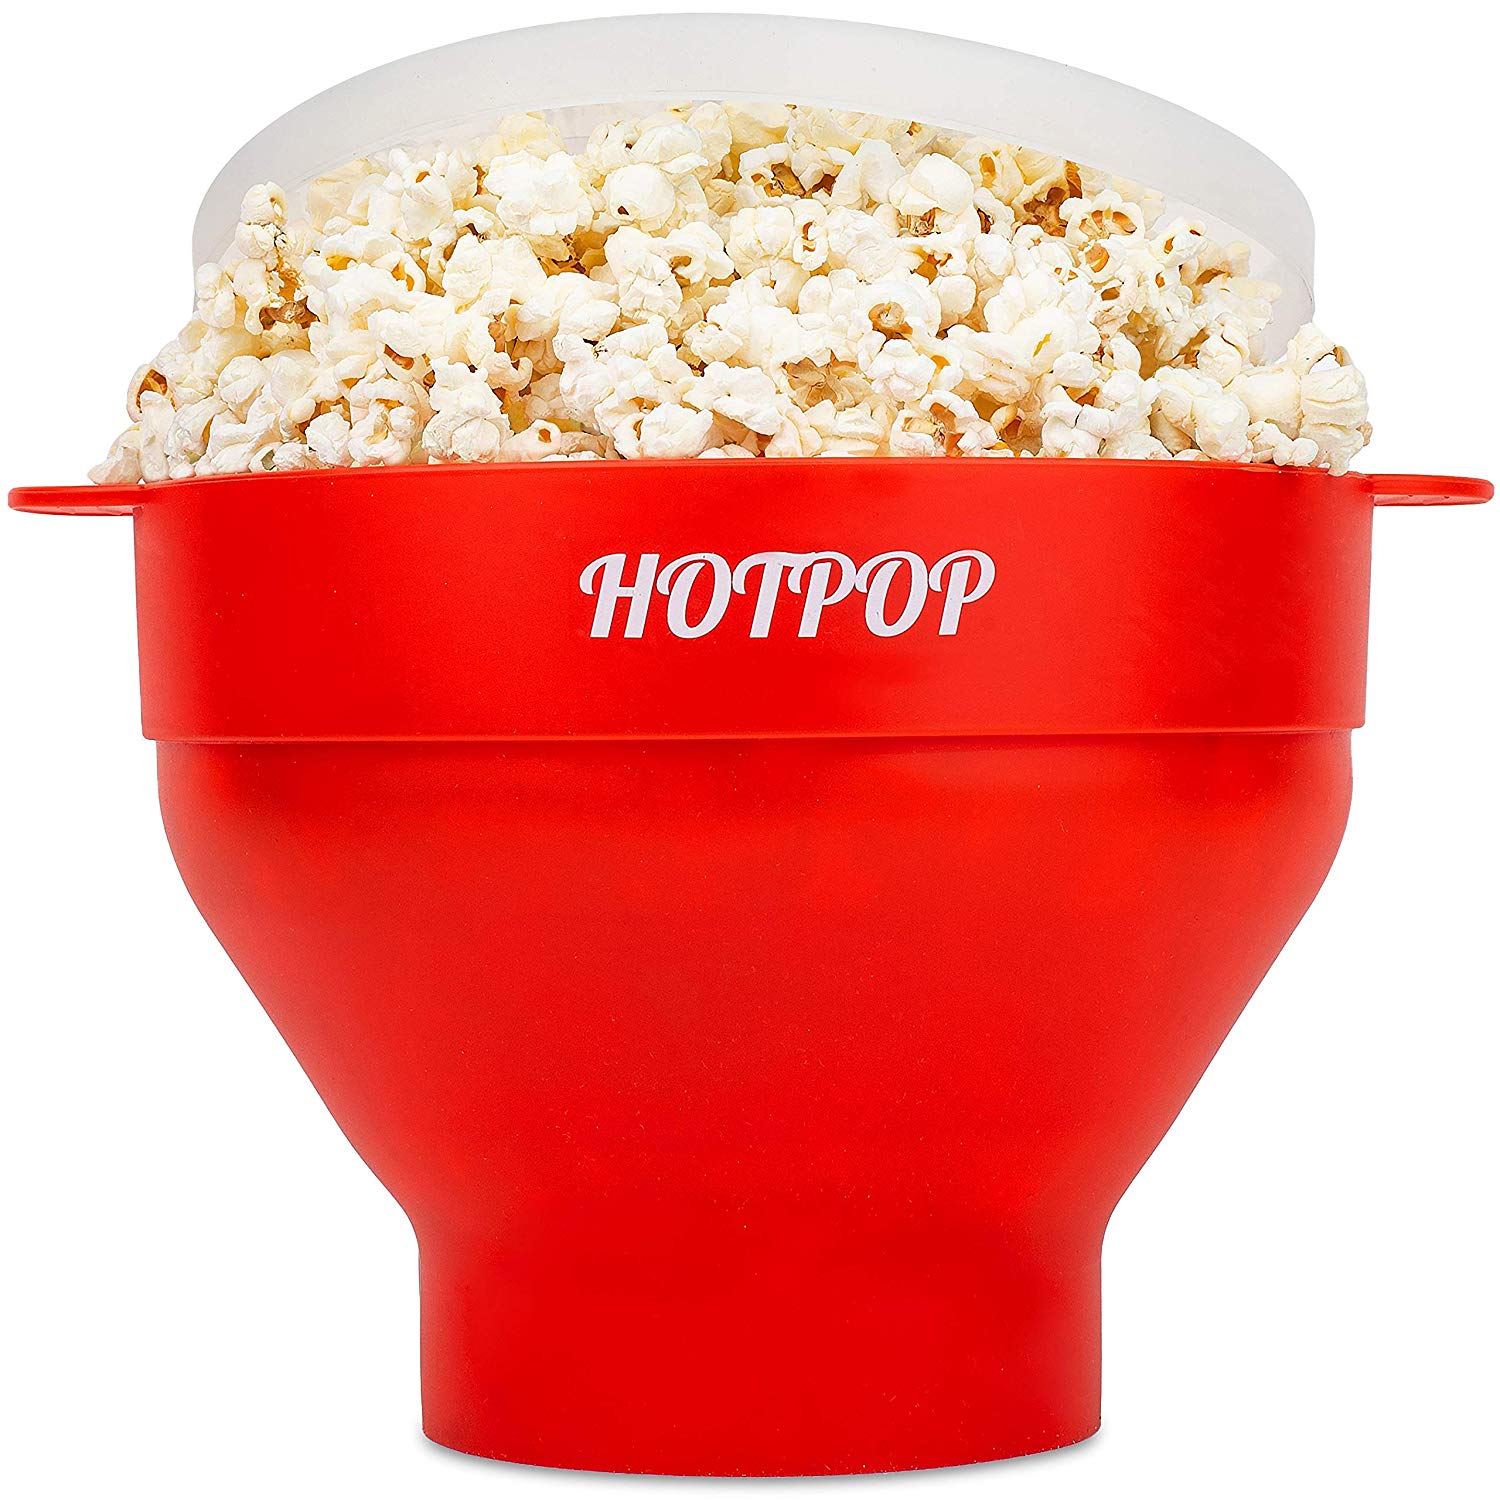 Blue DLseego Microwave Popcorn Popper Silicone Popcorn Maker,Hot Air Microwave Popcorn Makers with Handles,Collapsible Bowl BPA Free & Multifunctional Scoops Stainless Steel Shovel 